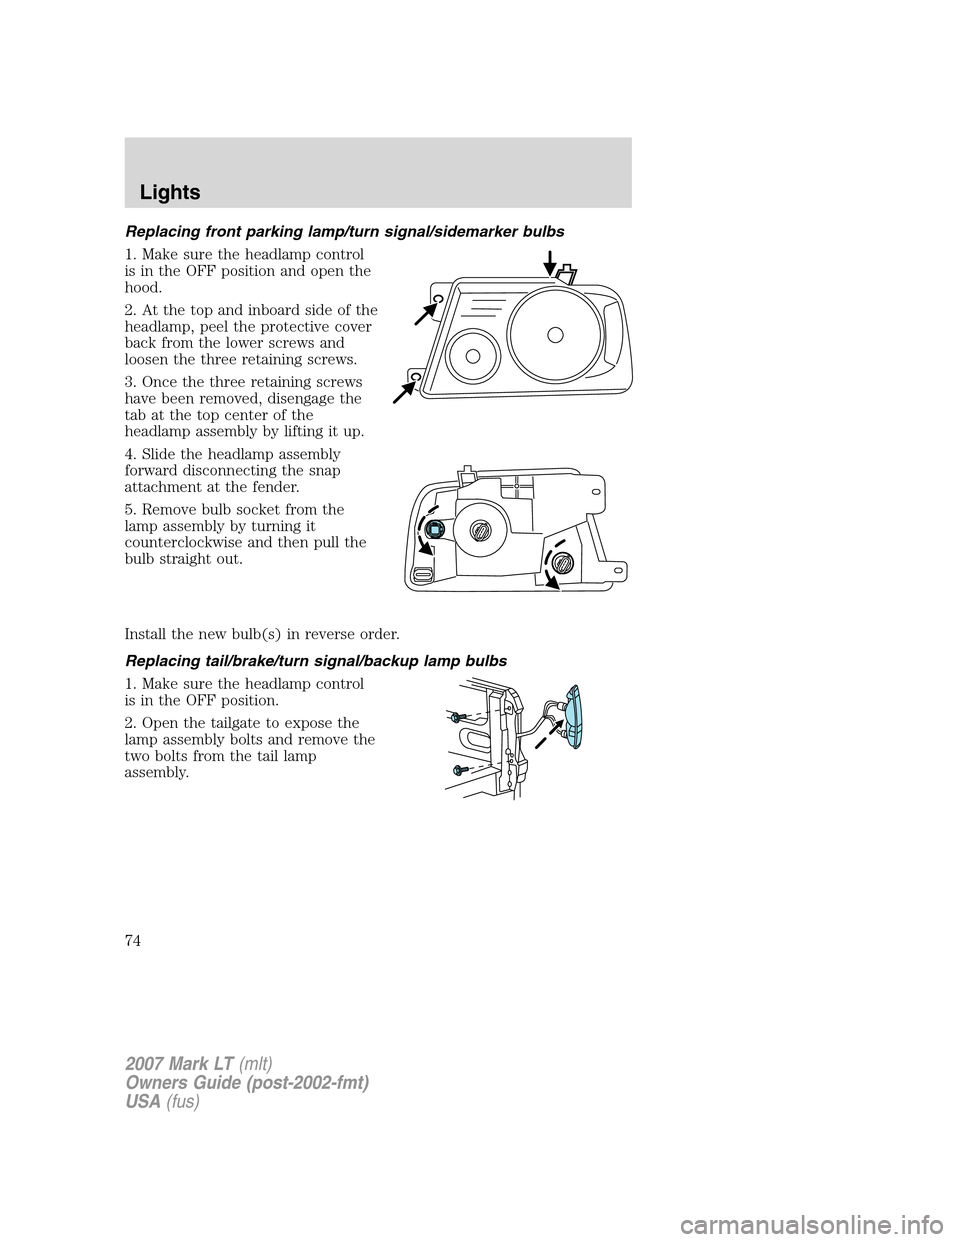 LINCOLN MARK LT 2007  Owners Manual Replacing front parking lamp/turn signal/sidemarker bulbs
1. Make sure the headlamp control
is in the OFF position and open the
hood.
2. At the top and inboard side of the
headlamp, peel the protectiv